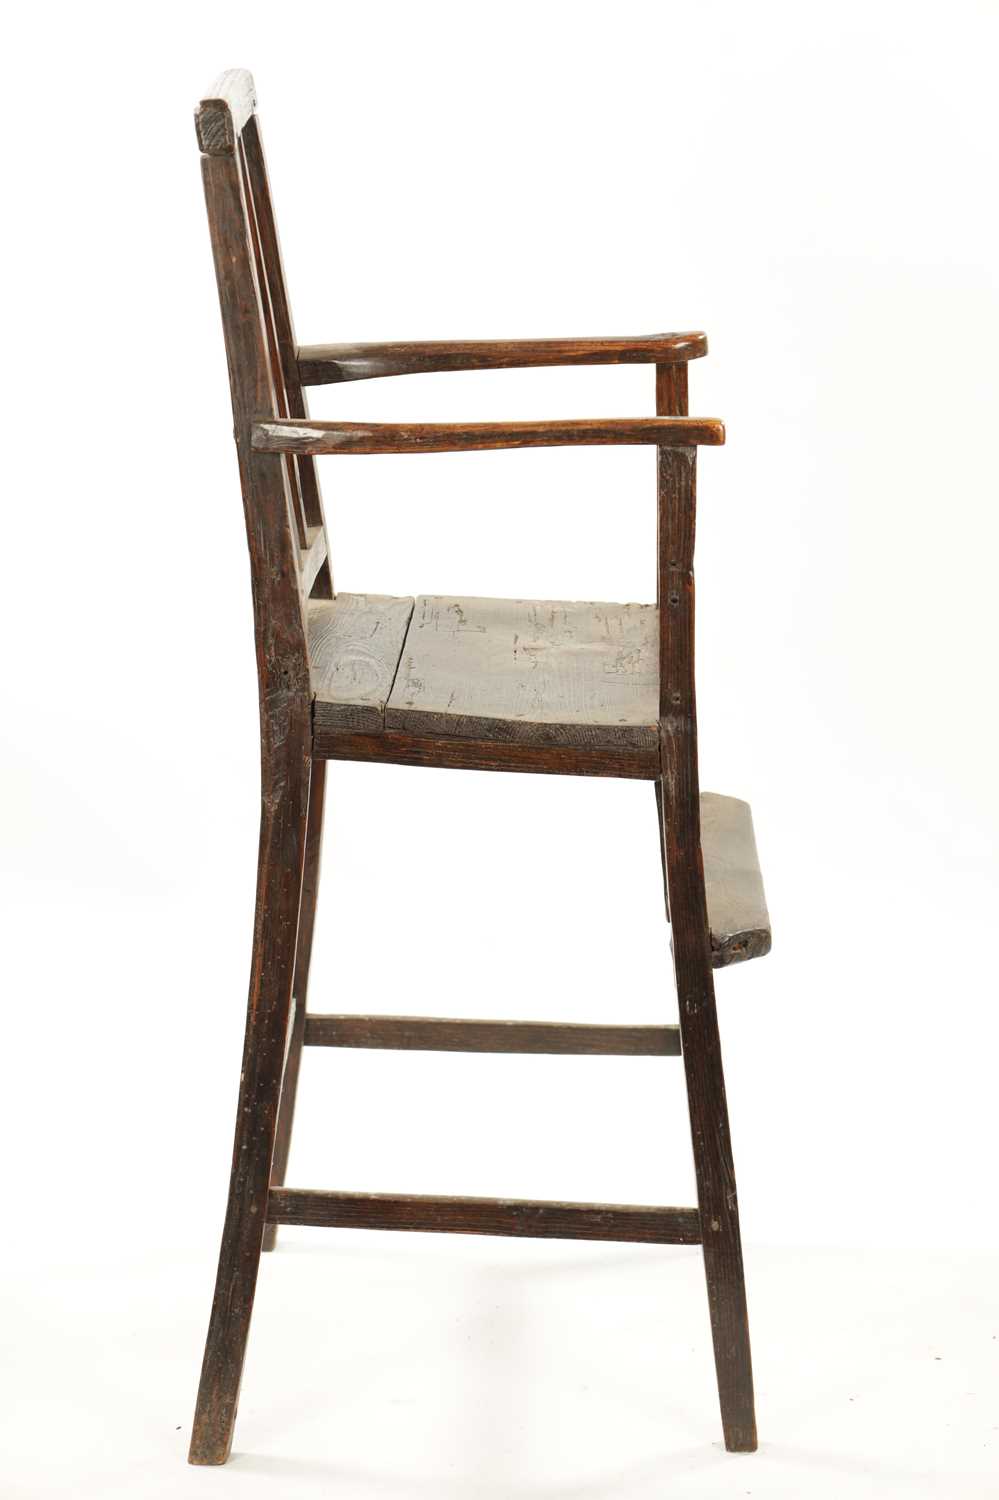 A PRIMITIVE 18TH CENTURY CHILDS FRUITWOOD SPLAT BACK HIGH CHAIR - Image 7 of 7